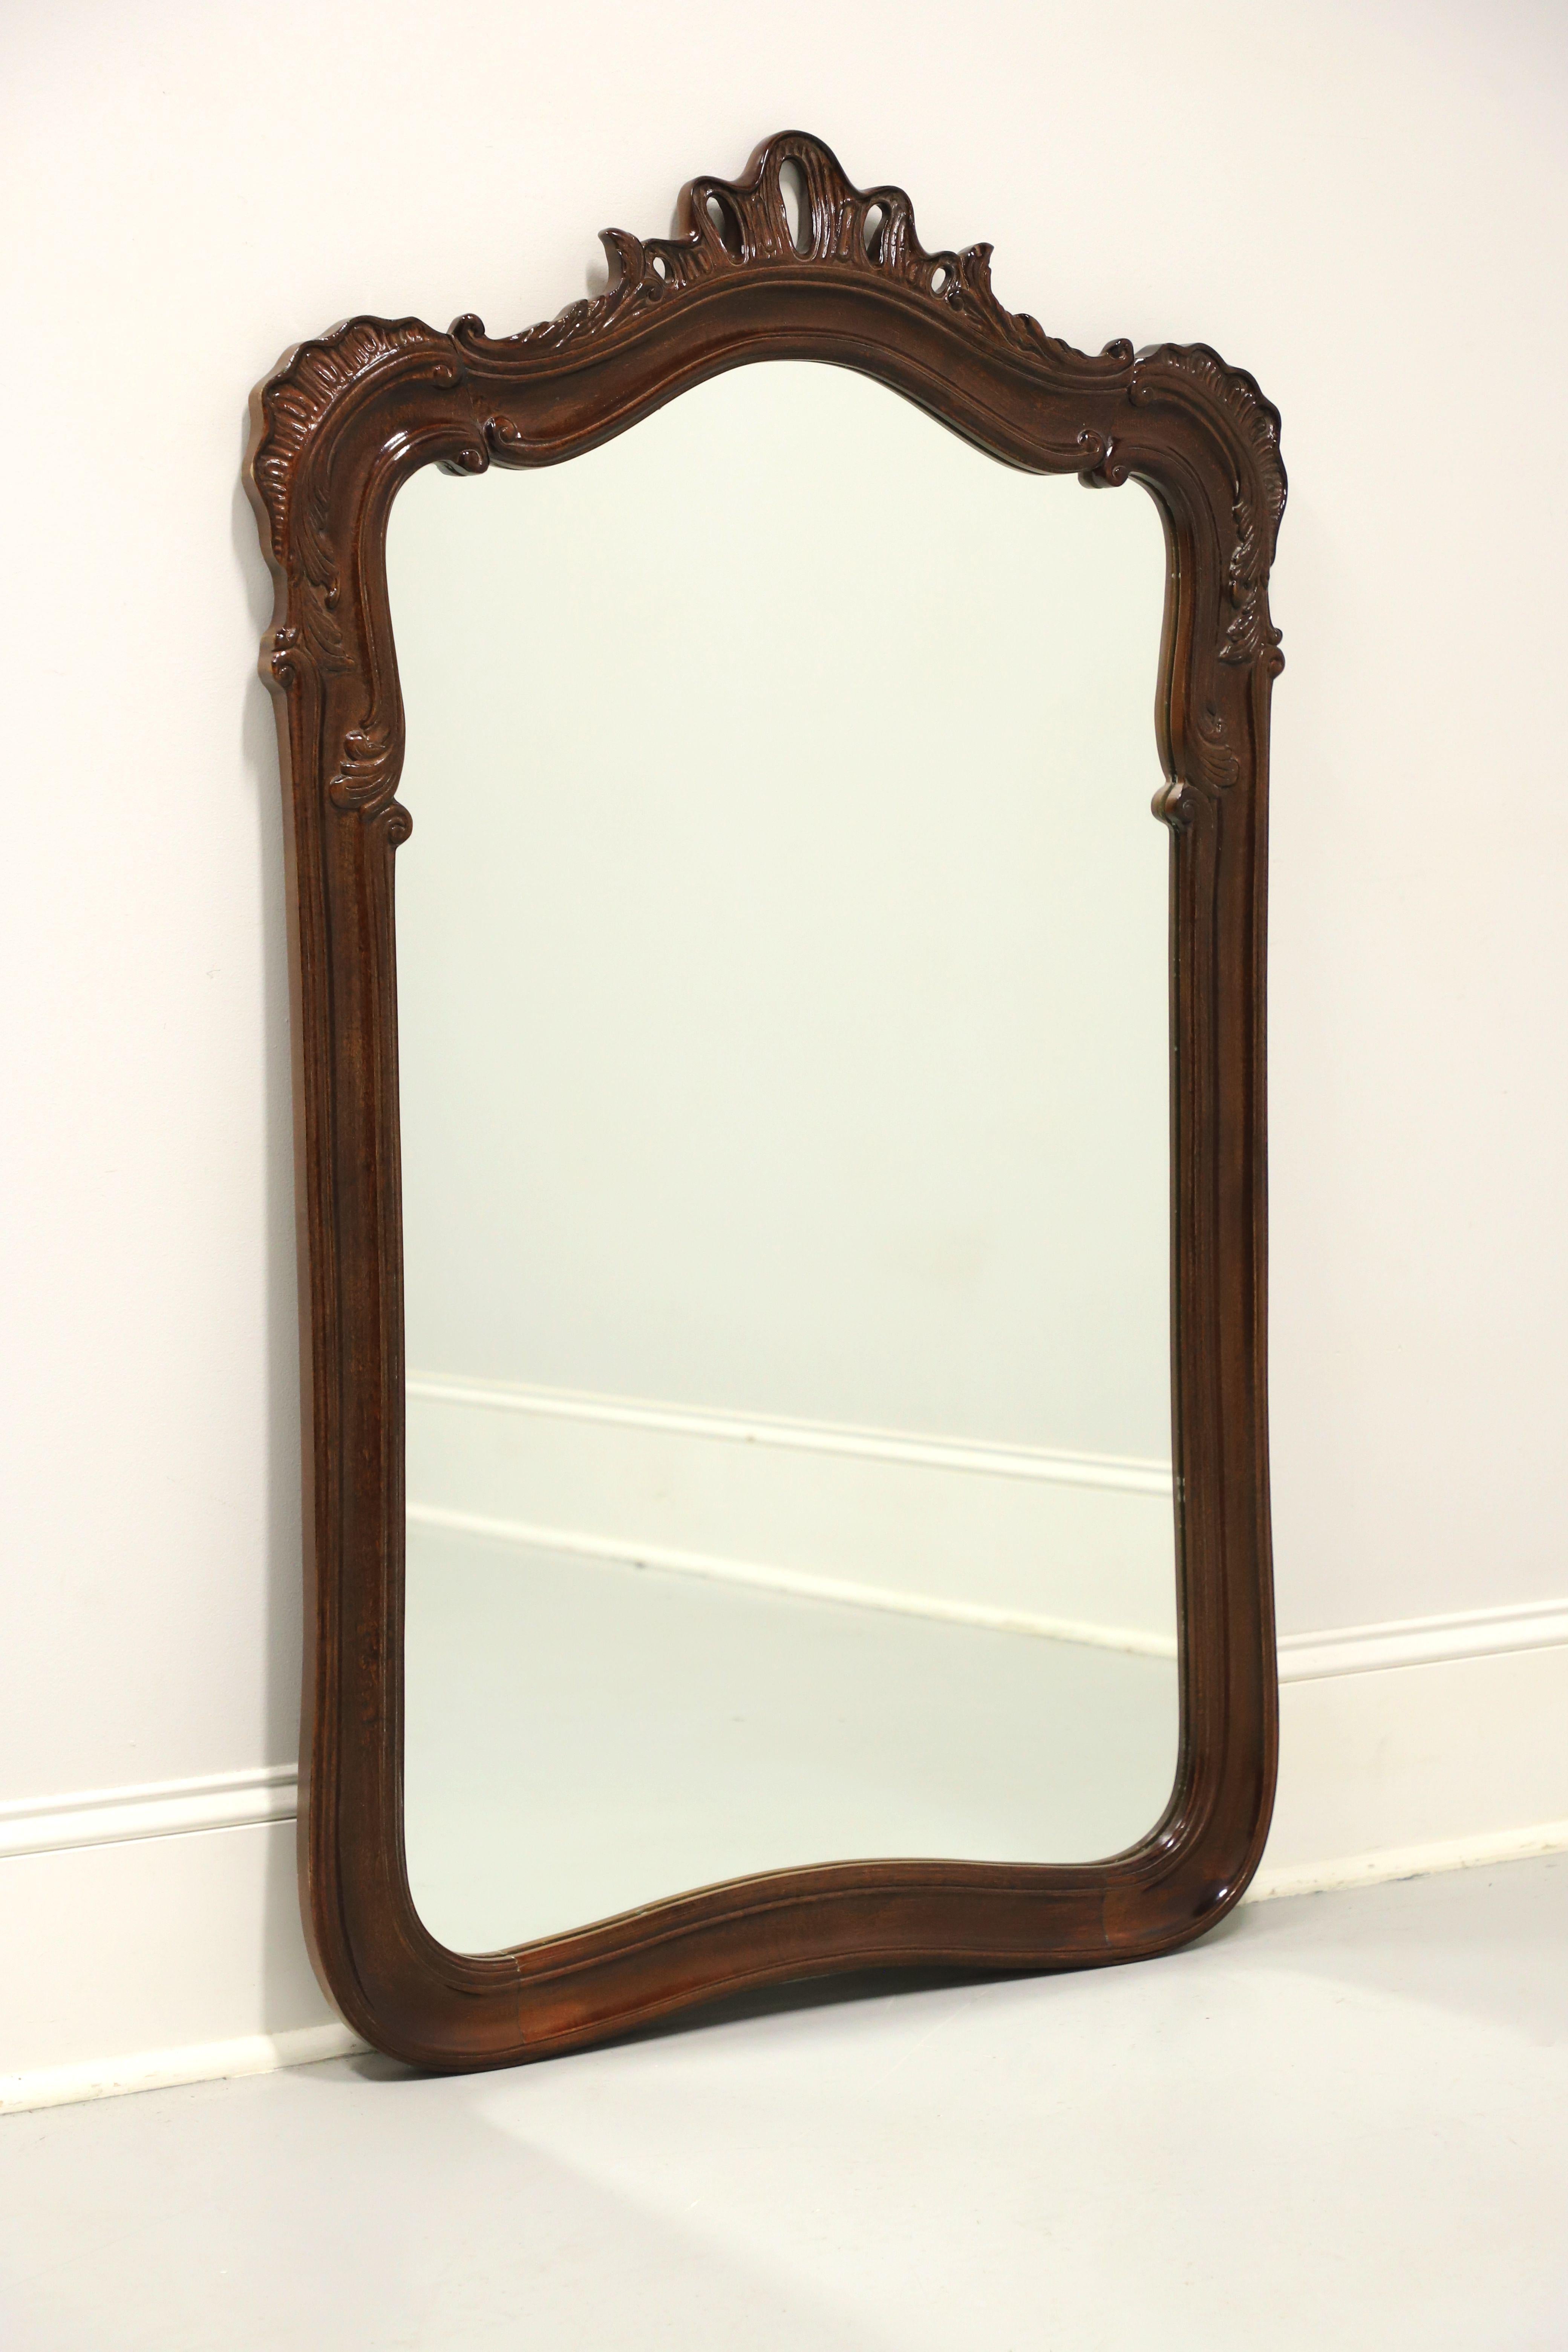 A French Country Louis XV style wall mirror by Henredon. Mirrored glass in a mahogany frame. Frame features an arched and decoratively carved top with an open crown-like carving to the center. Made in Morganton, North Carolina, USA, in the late 20th